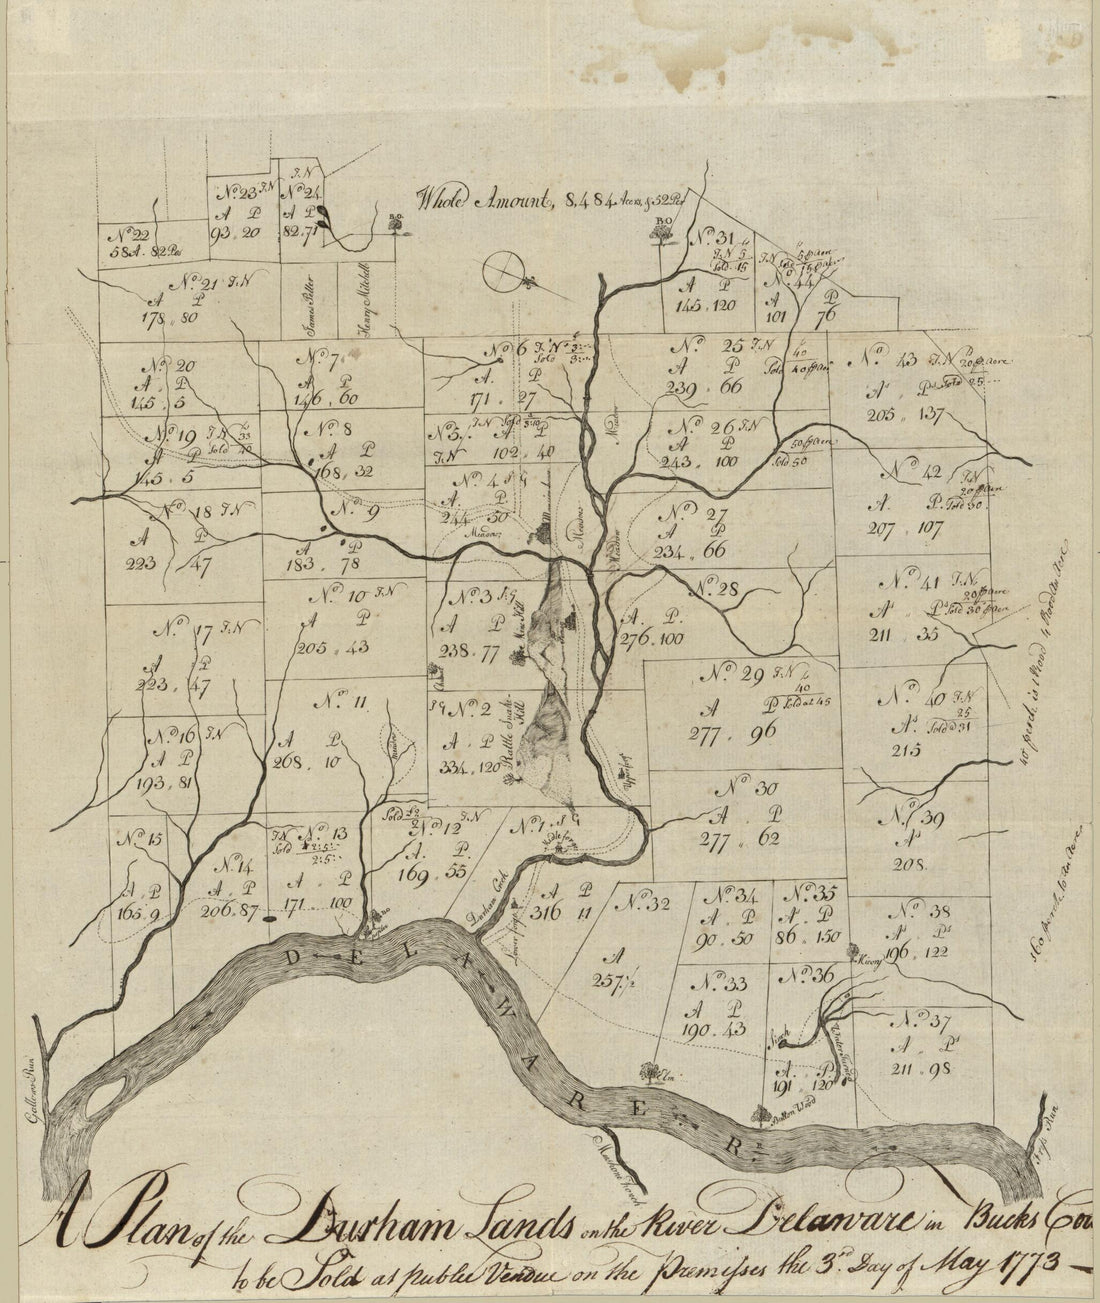 This old map of A Plan of the Durham Lands On the River Delaware In Bucks County : to Be Sold at Public Vendue On the Premisses the 3rd Day of May from 1773 was created by  in 1773